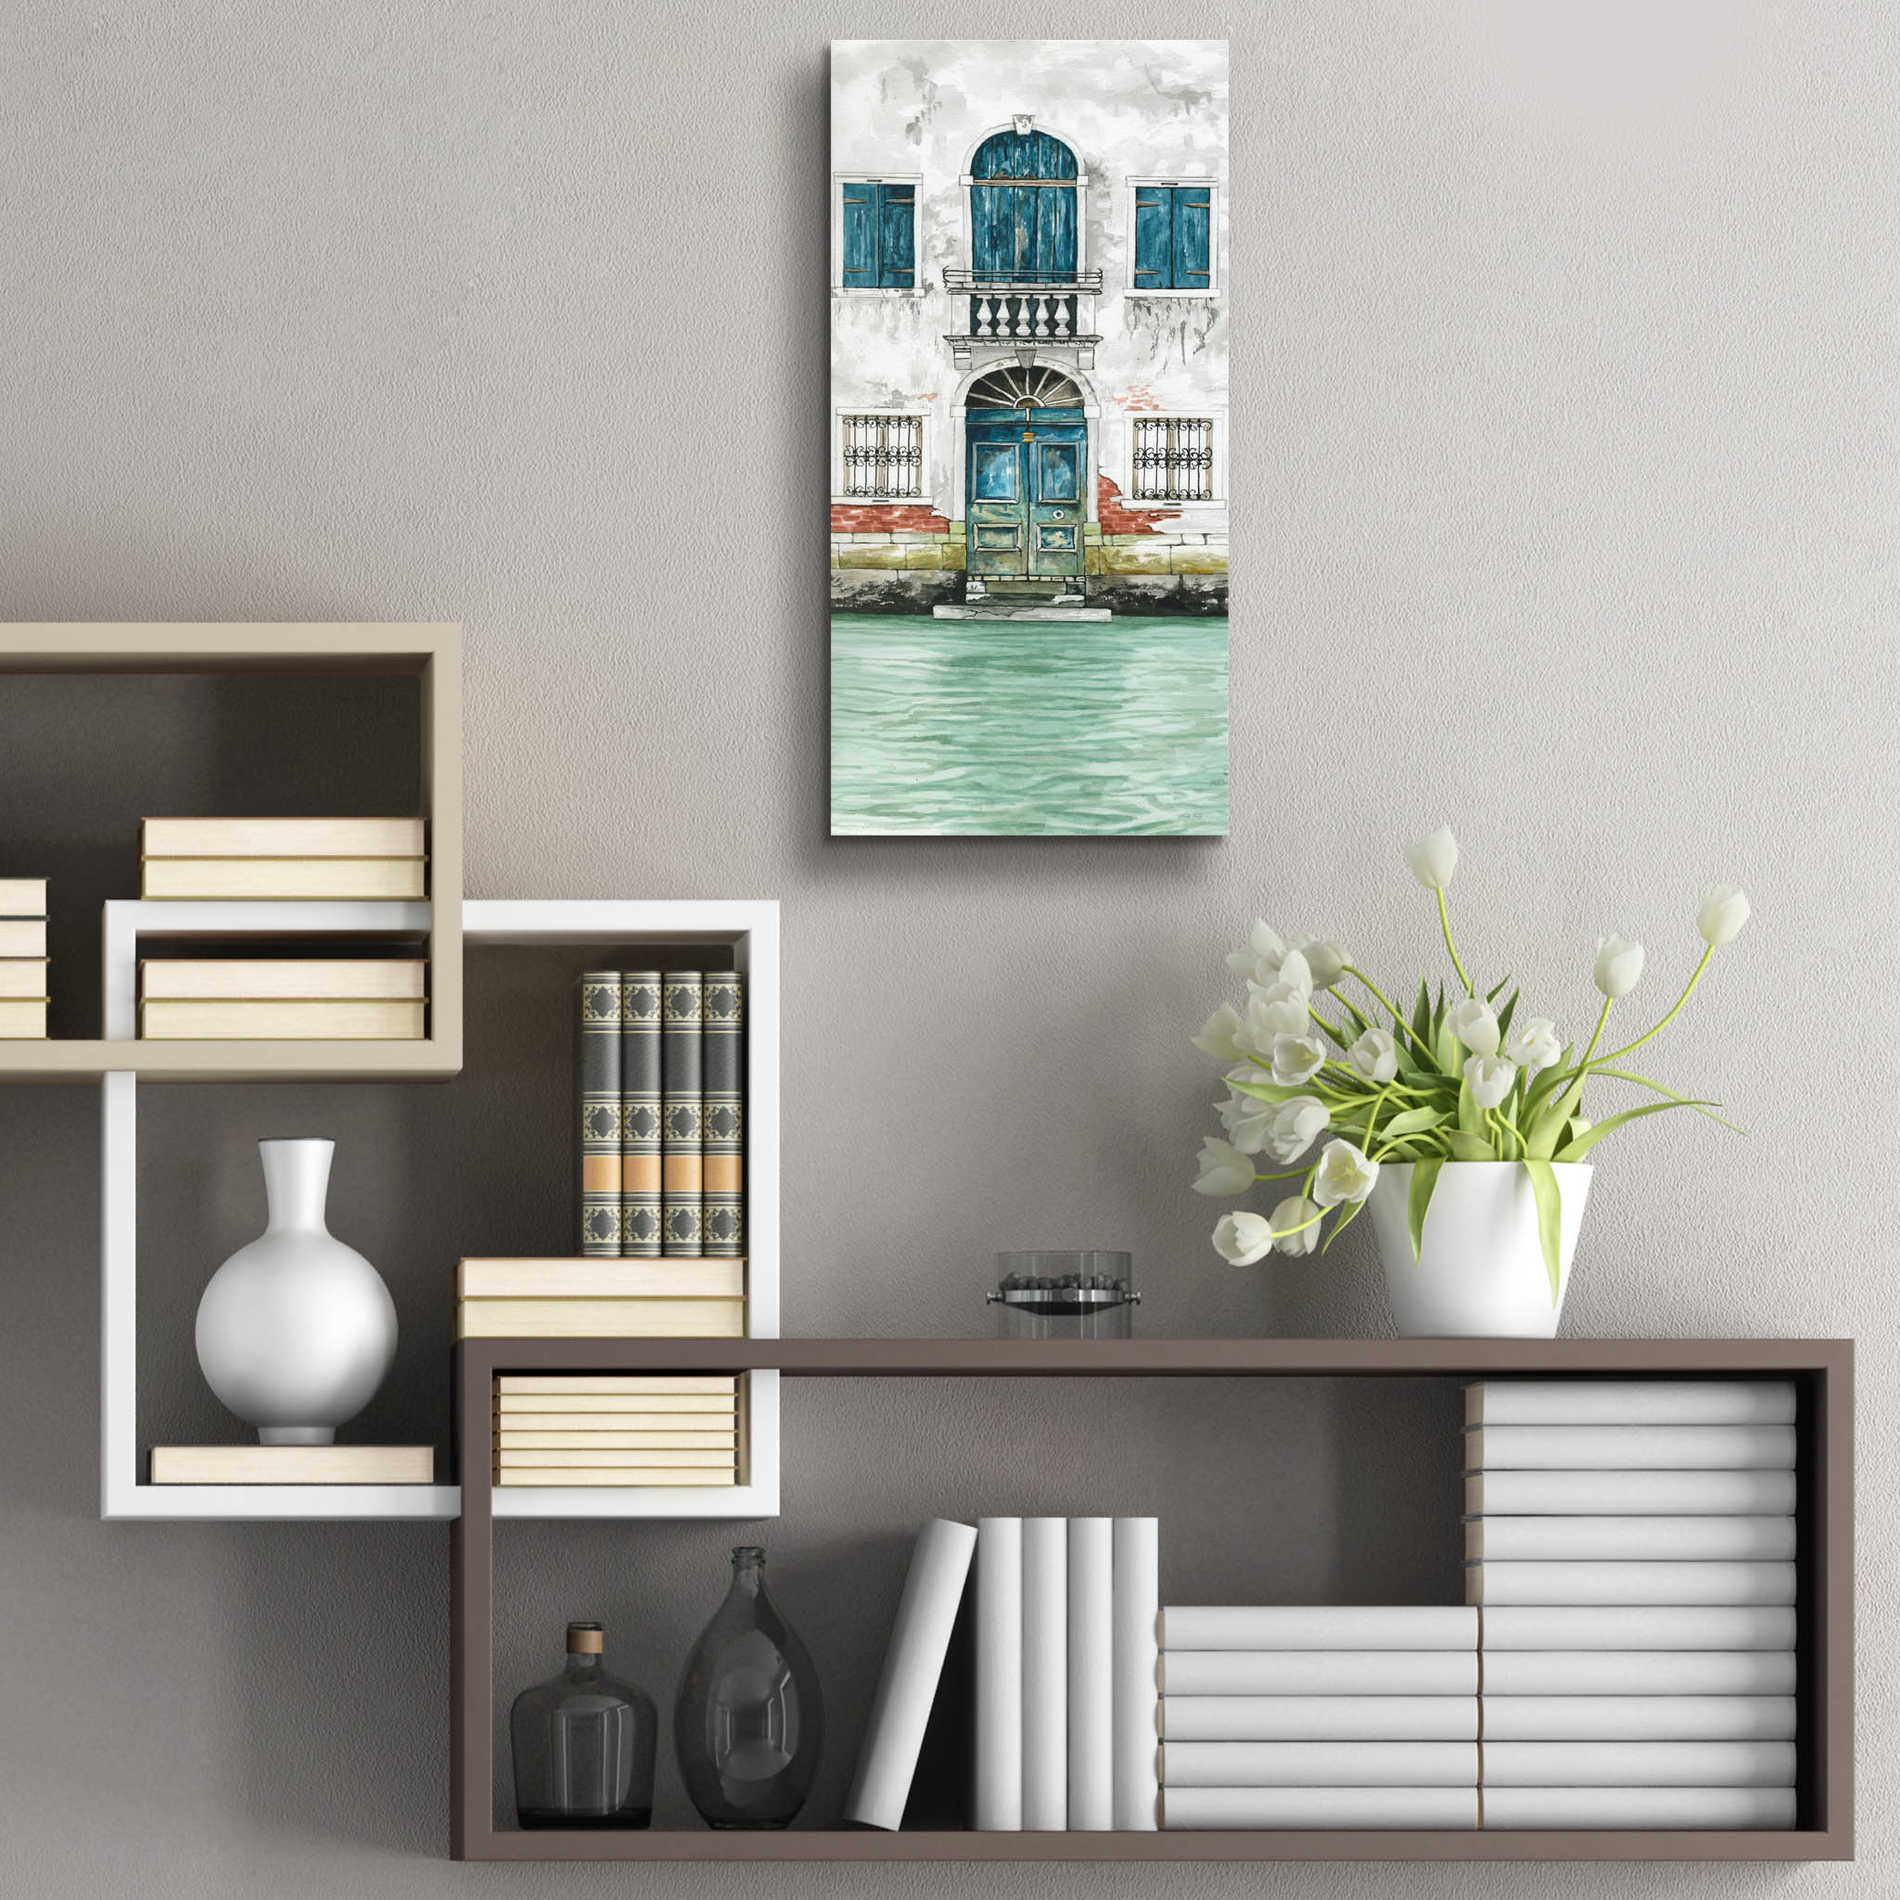 Epic Art 'Grand Canal II' by Cindy Jacobs, Acrylic Glass Wall Art,12x24